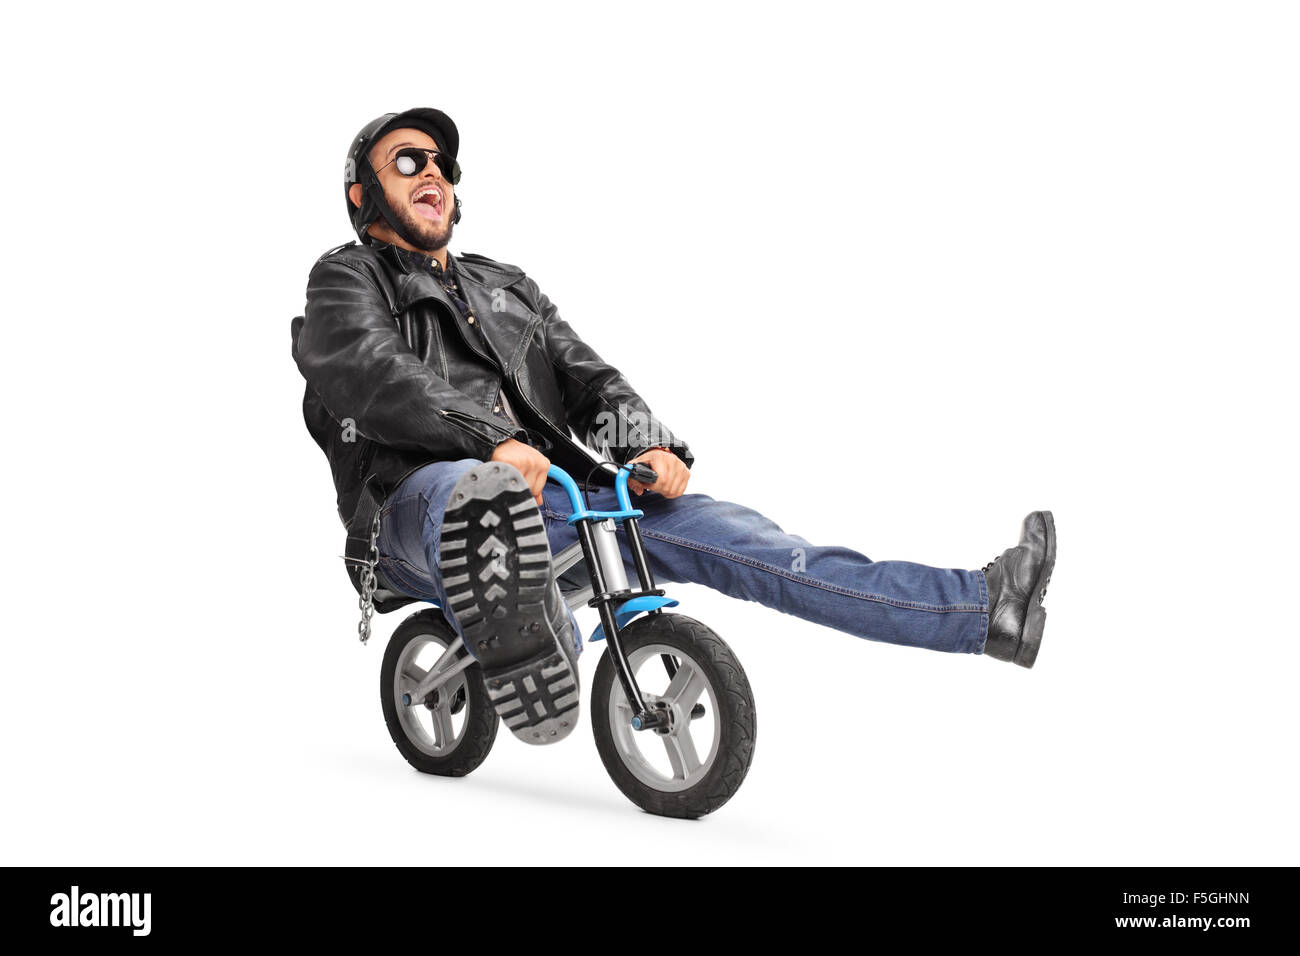 Carefree young biker in black leather jacket riding a small bicycle isolated on white background Stock Photo